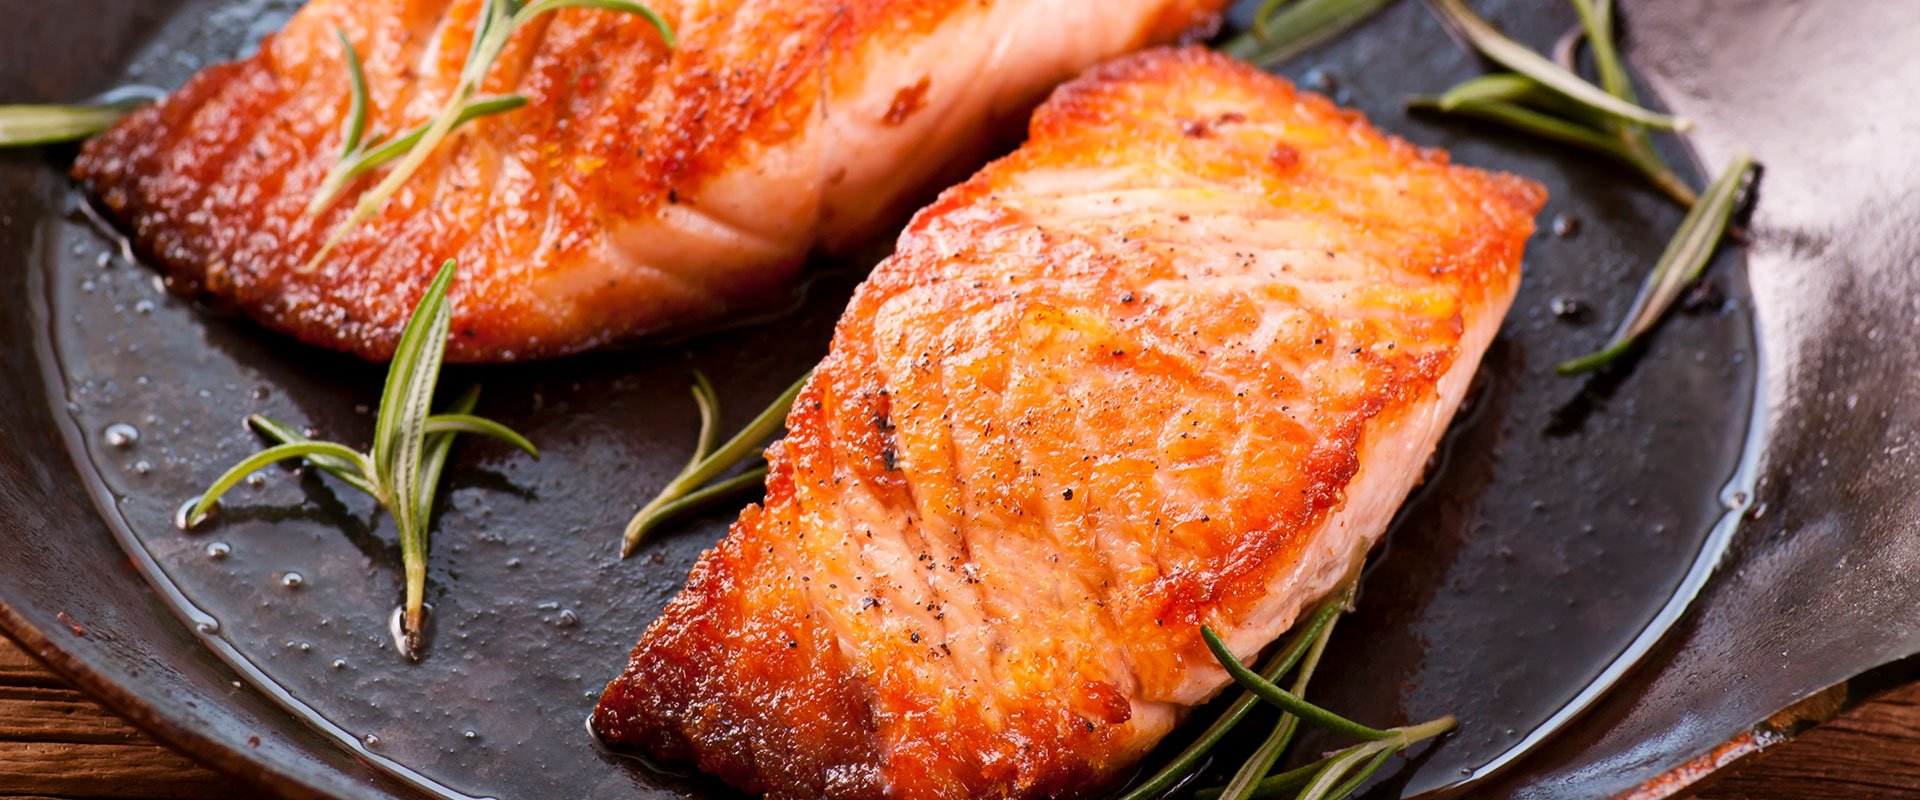 Fatty fish like salmon are good for your heart.